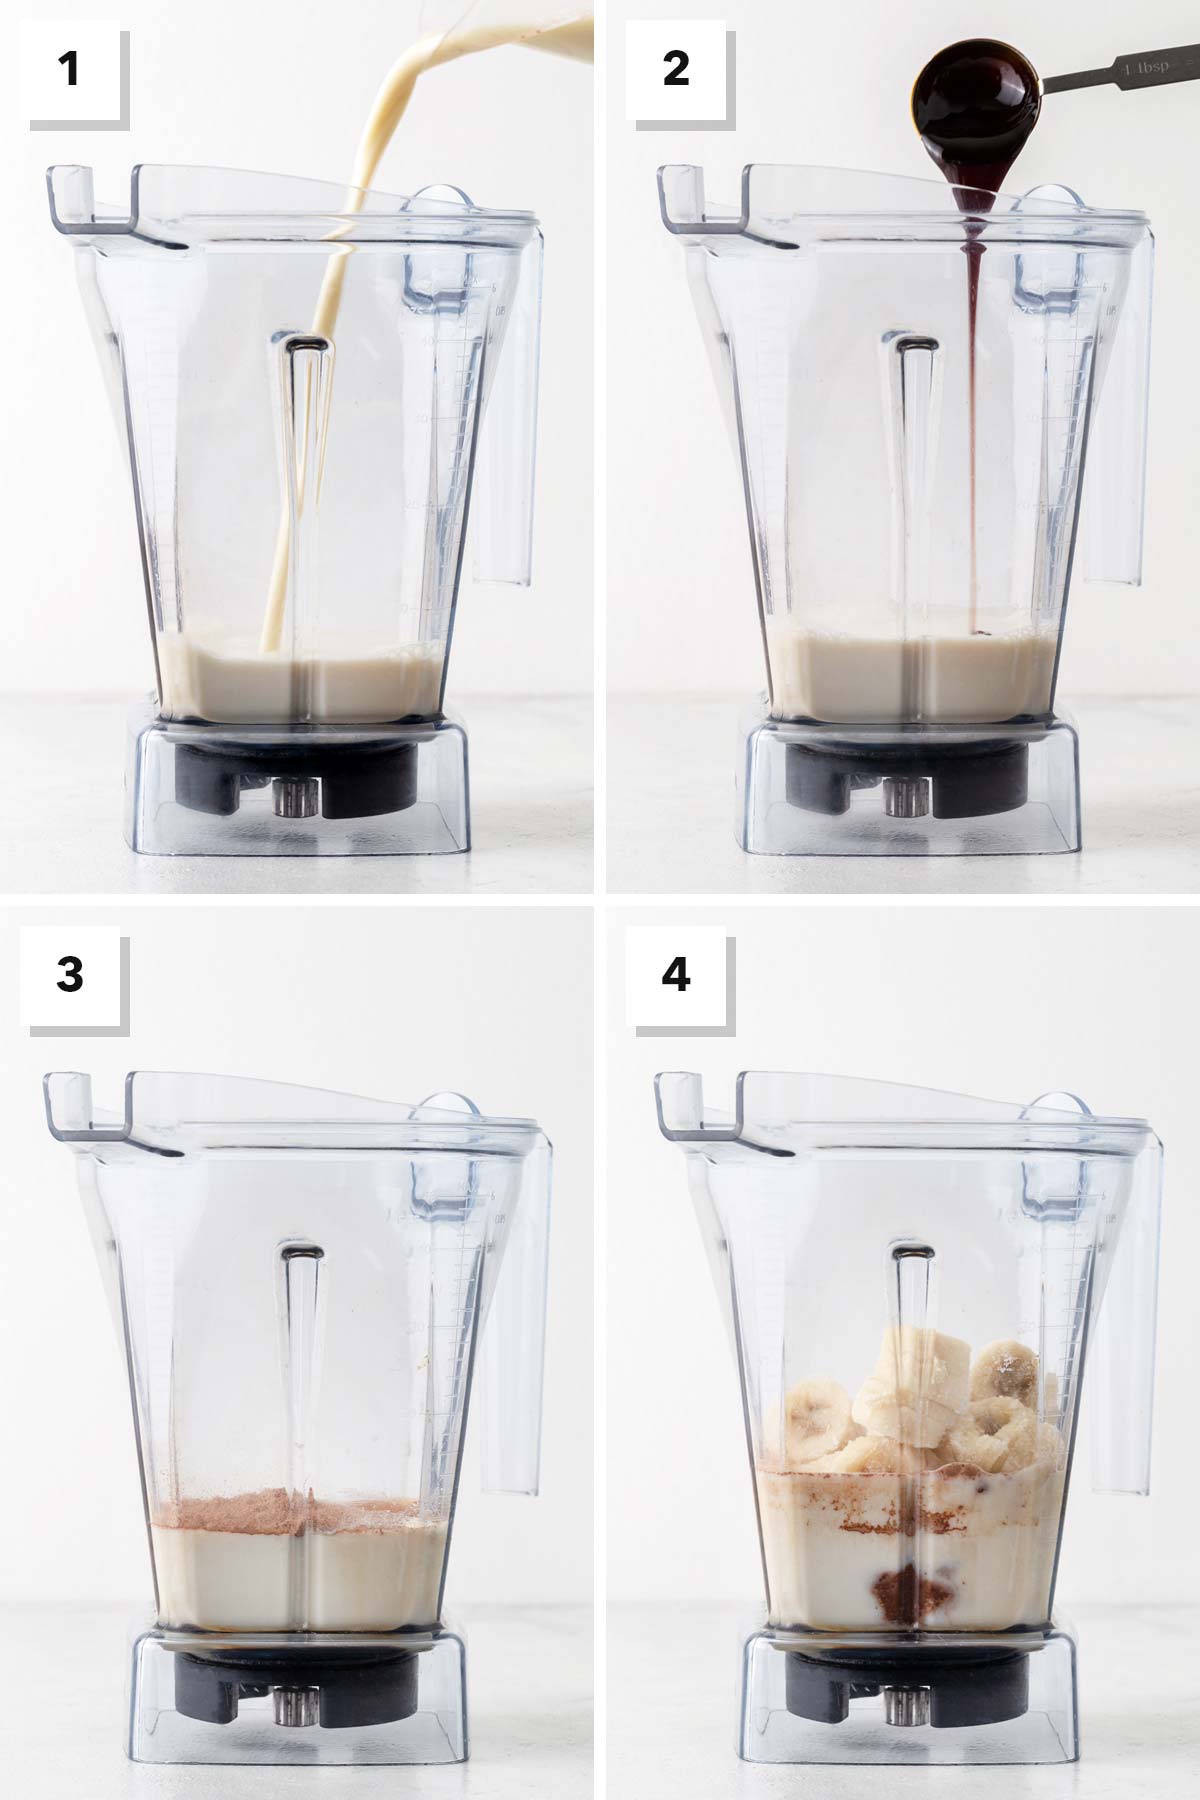 Steps for making a chocolate collagen smoothie.